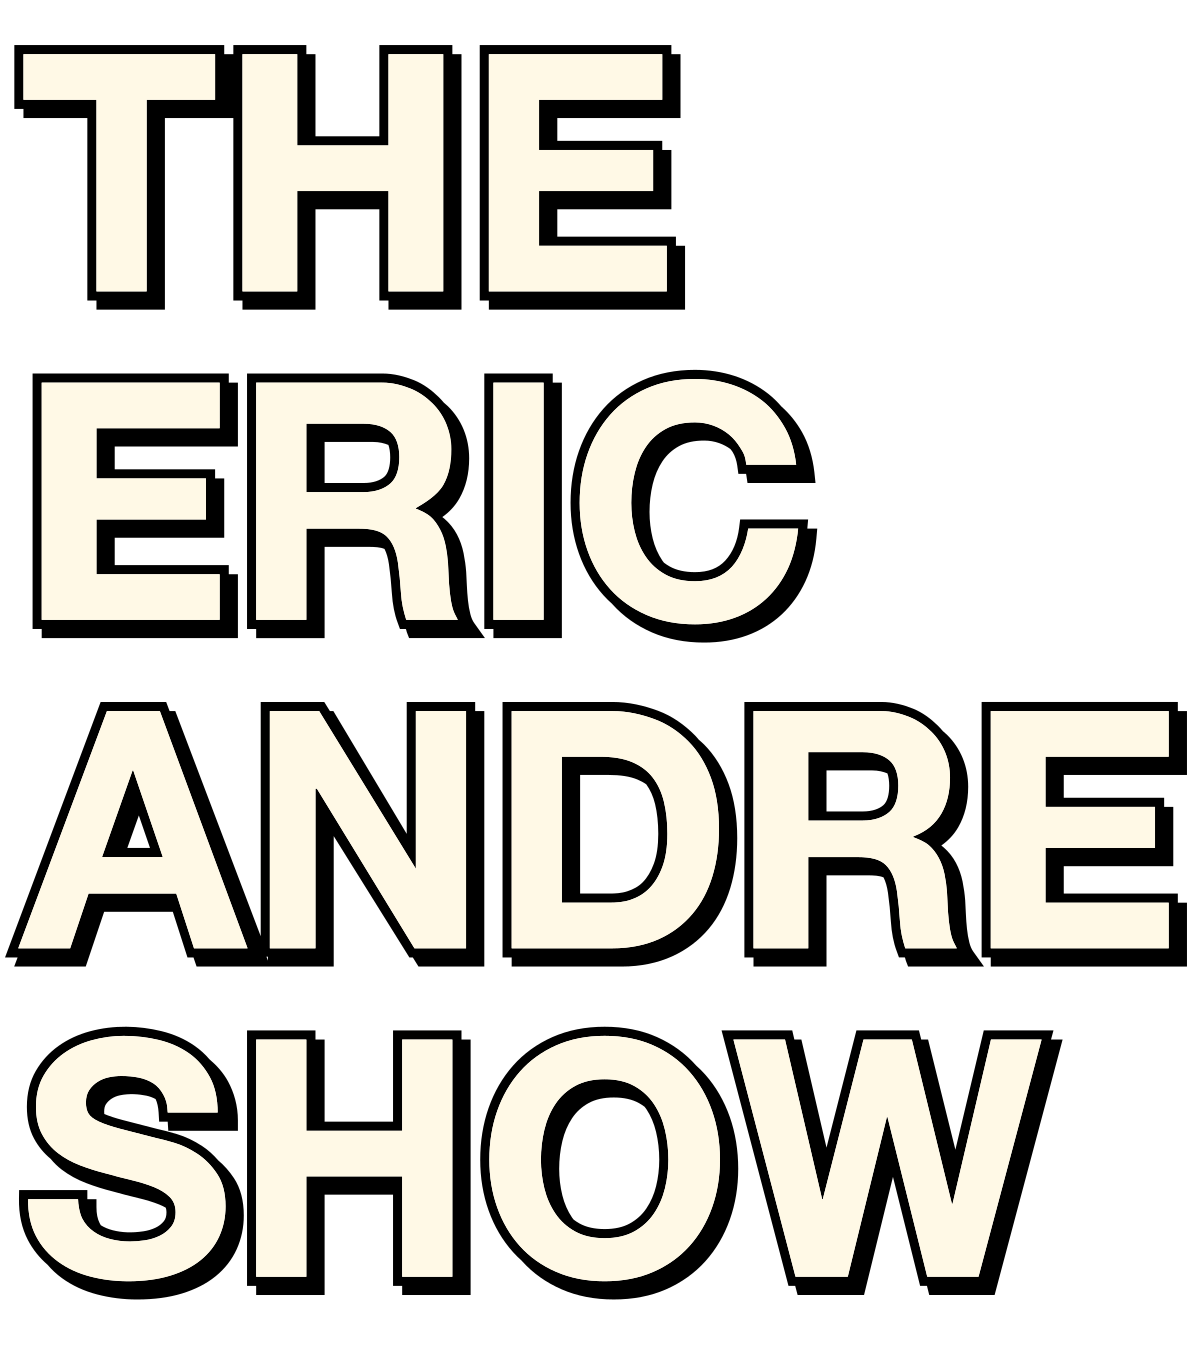 His best performance”: Lance Reddick Eric Andre interview story